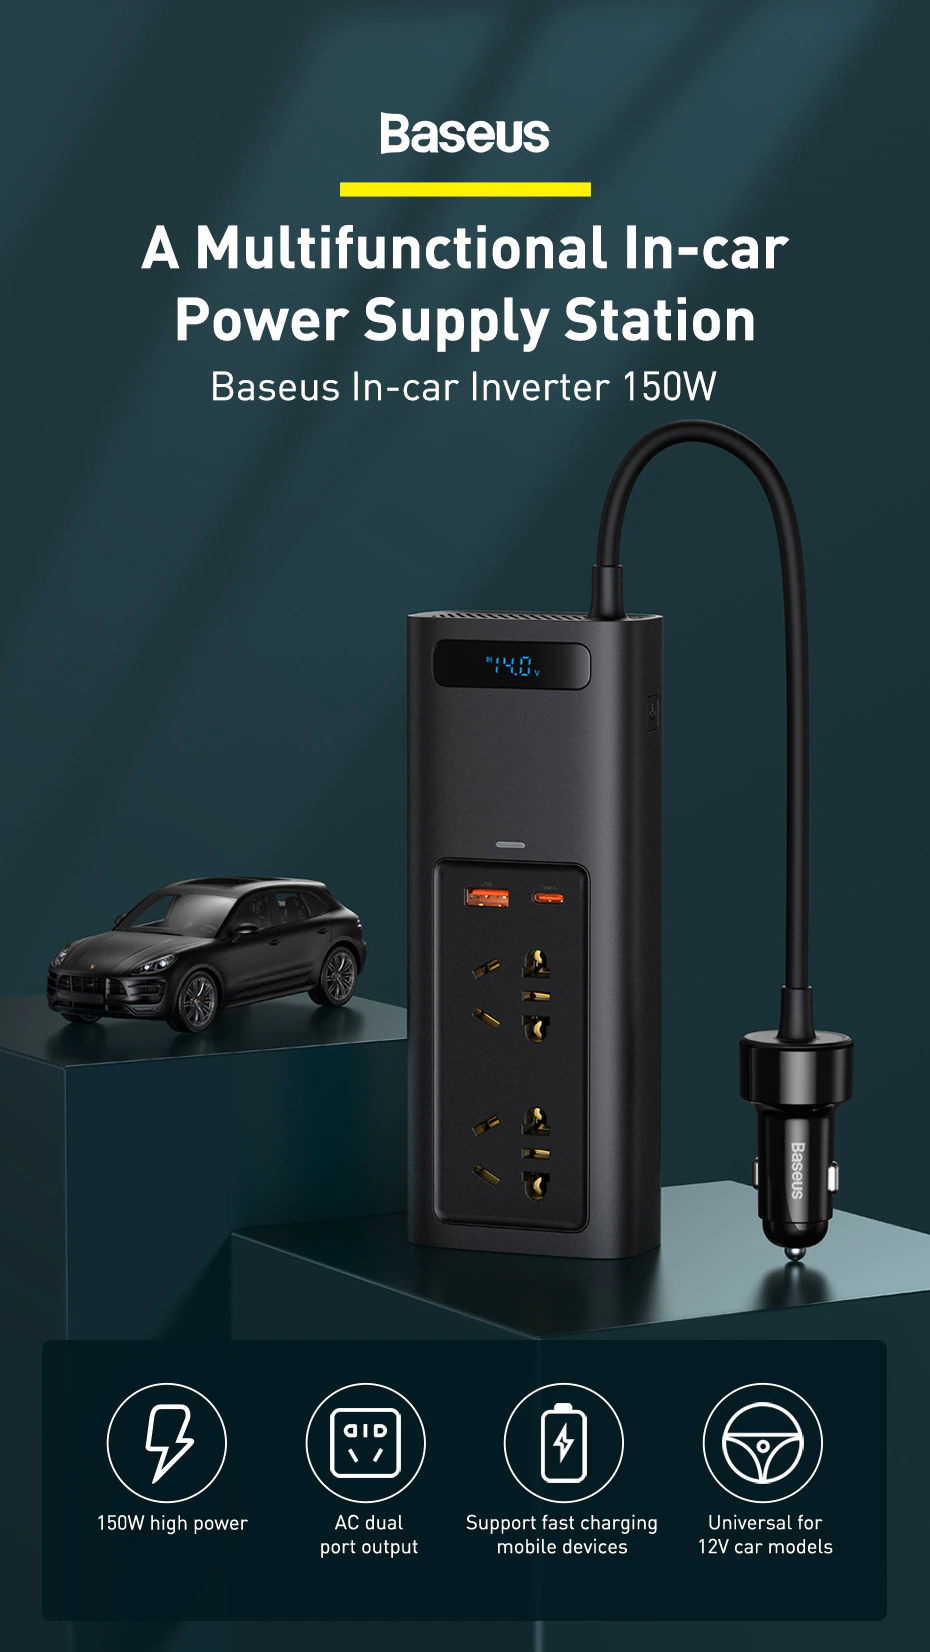 A Multifunctional In-car Power Supply Station Baseus In-car Inverter 150W